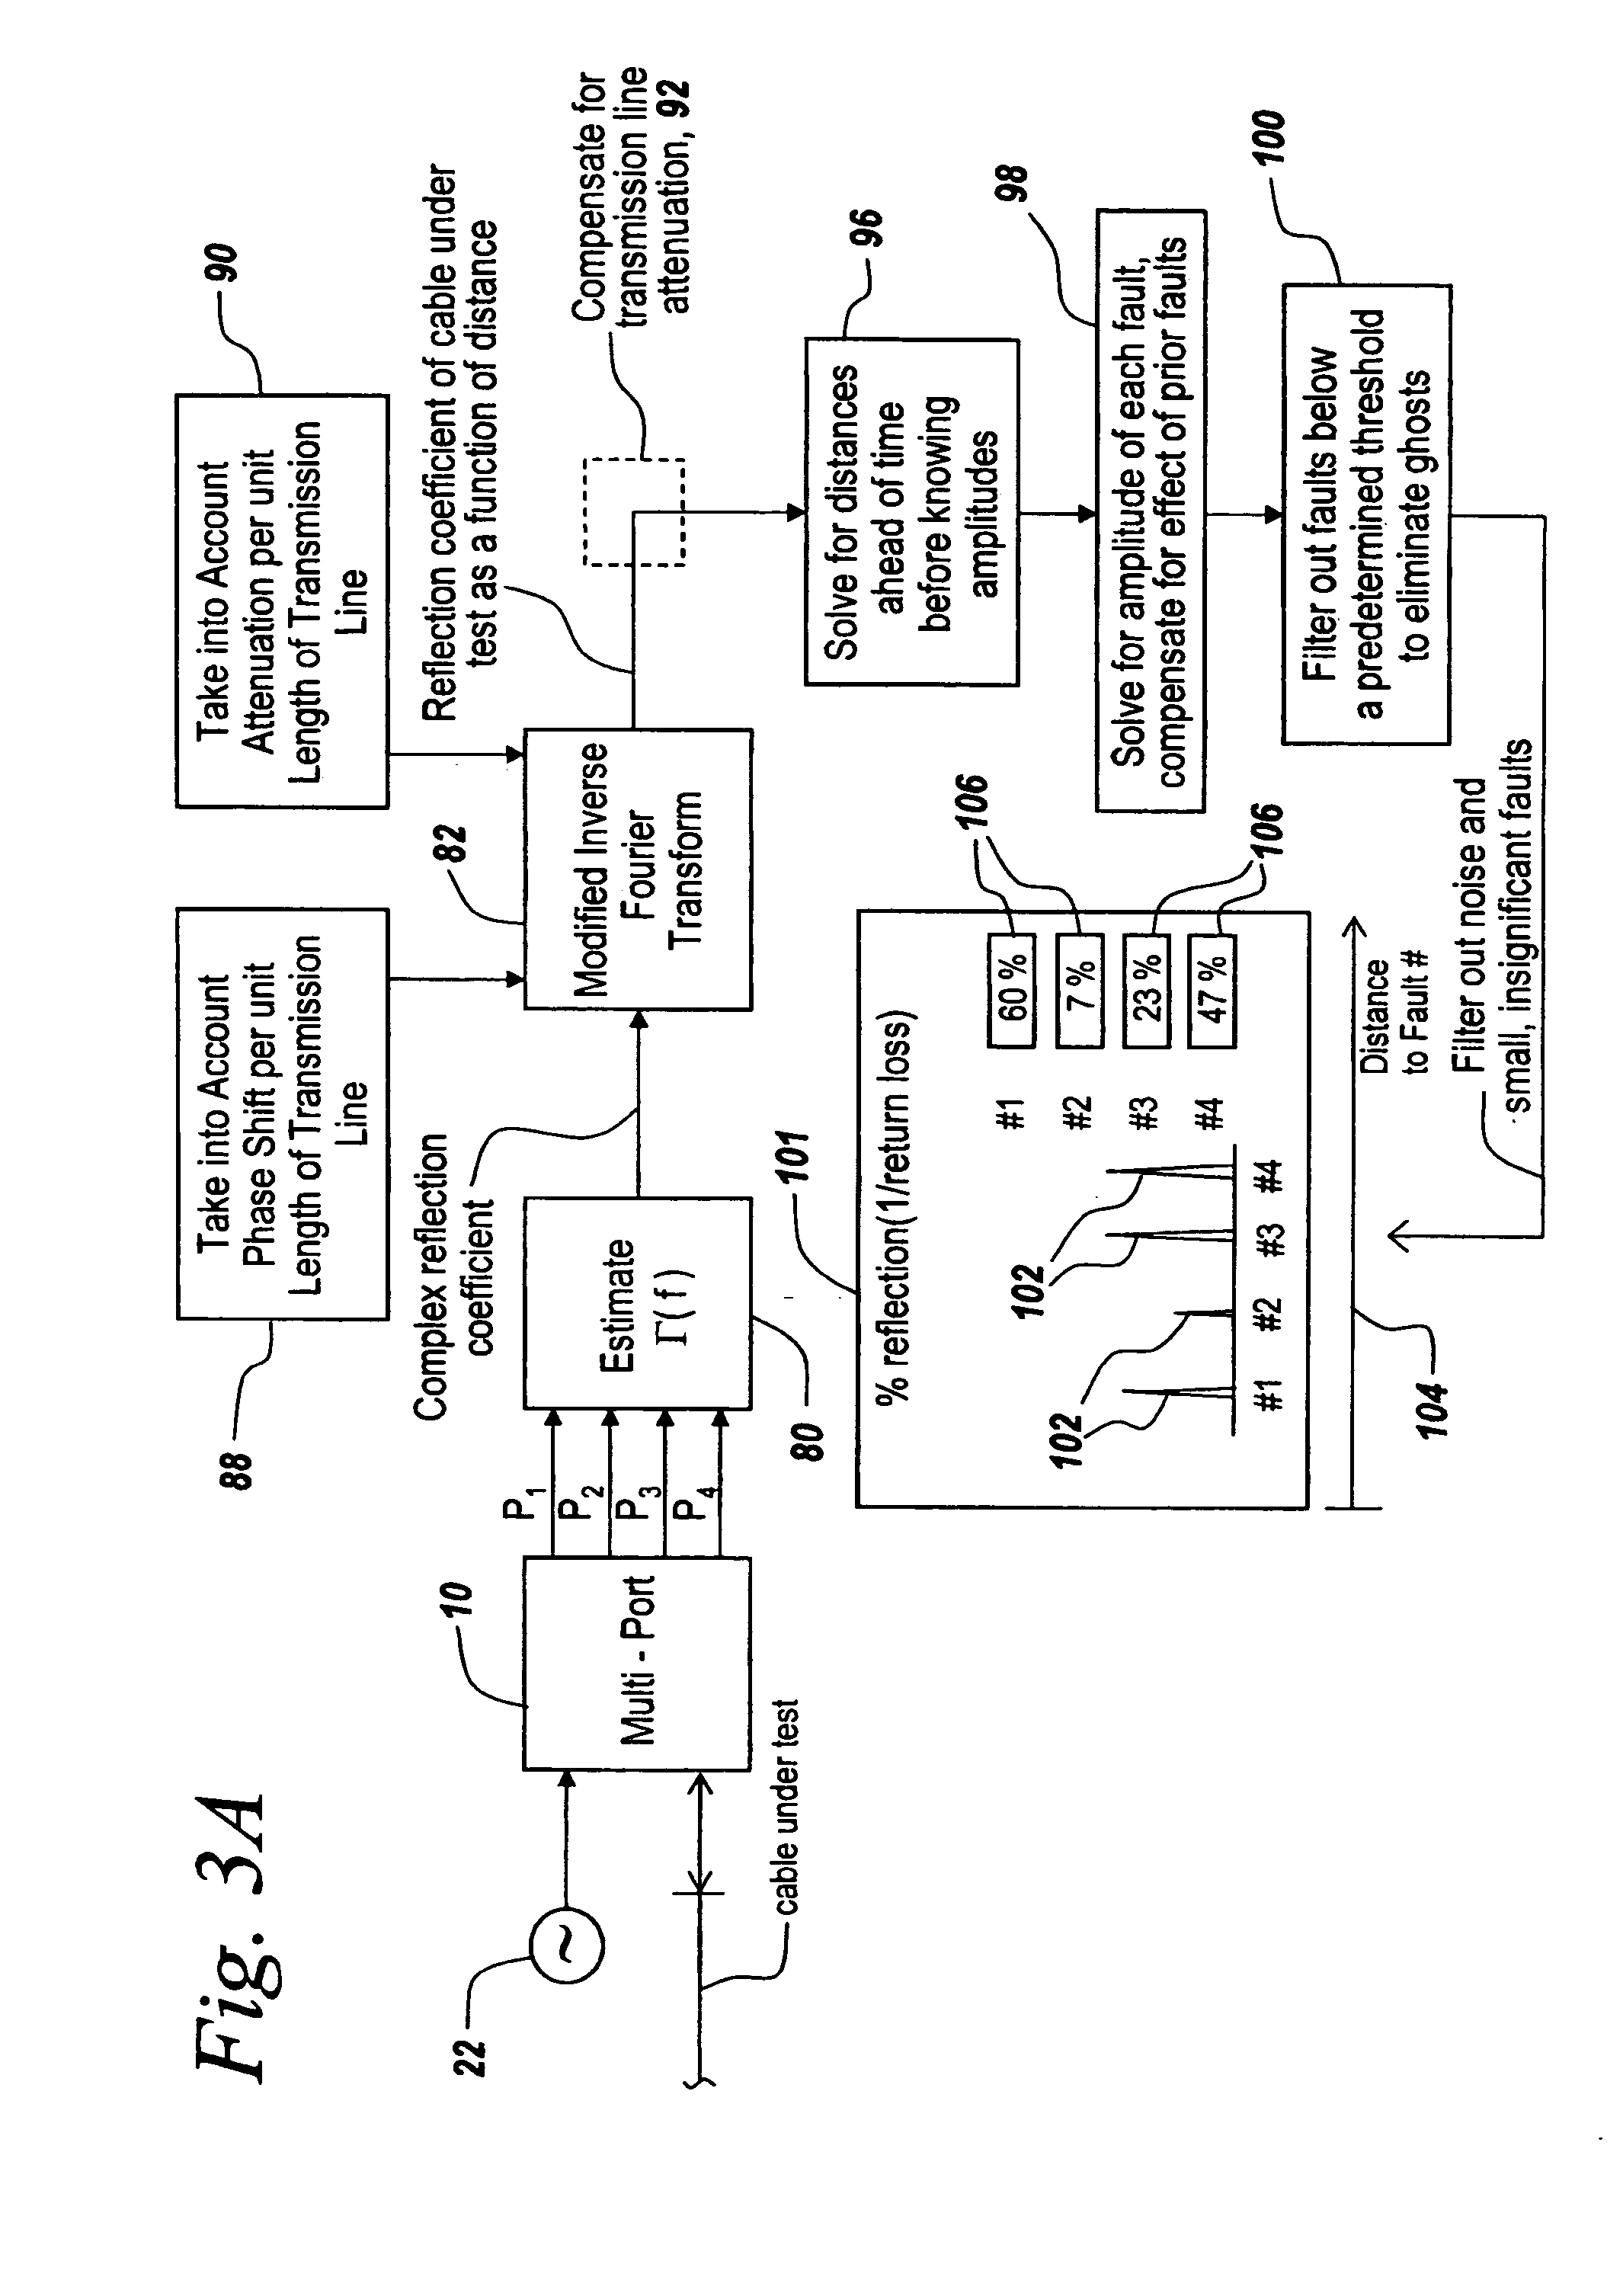 Method and apparatus for calibrating a frequency domain reflectometer